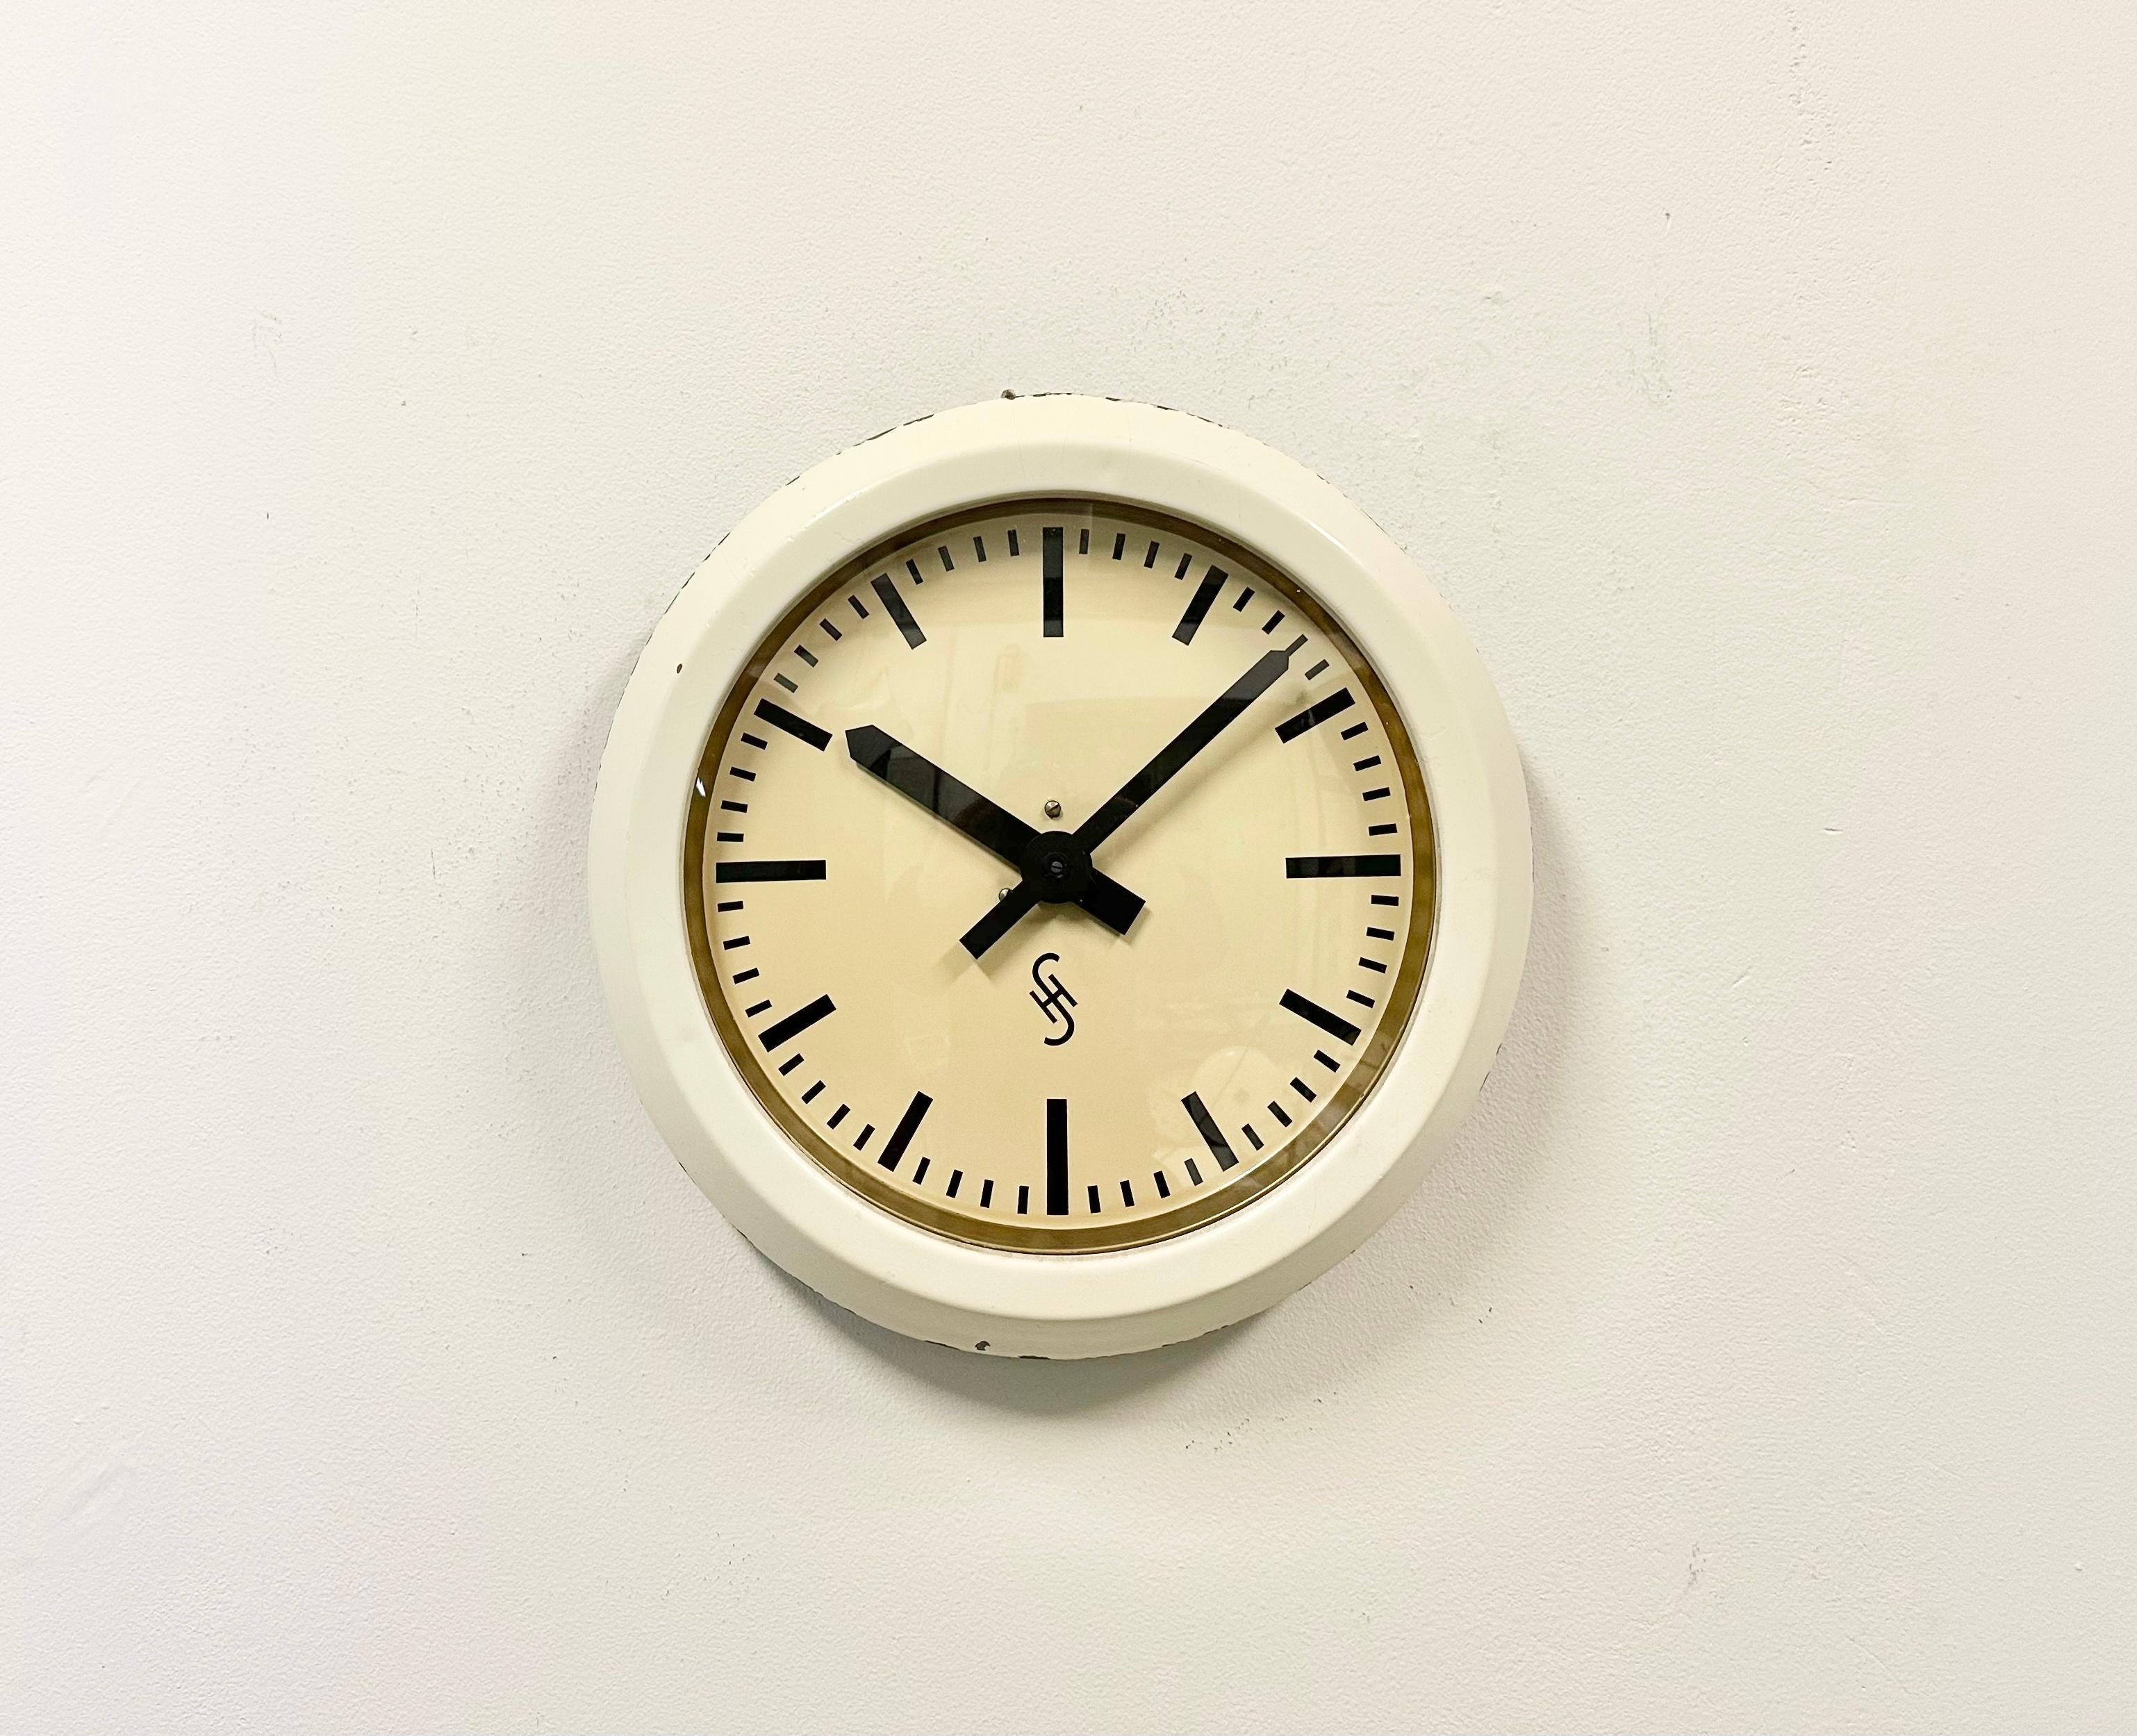 This wall clock was produced by Siemens and Halske in Germany during the 1950s. It features a beige metal frame, aluminum dial, and a clear glass cover. The piece has been converted into a battery-powered clockwork and requires only one AA-battery.